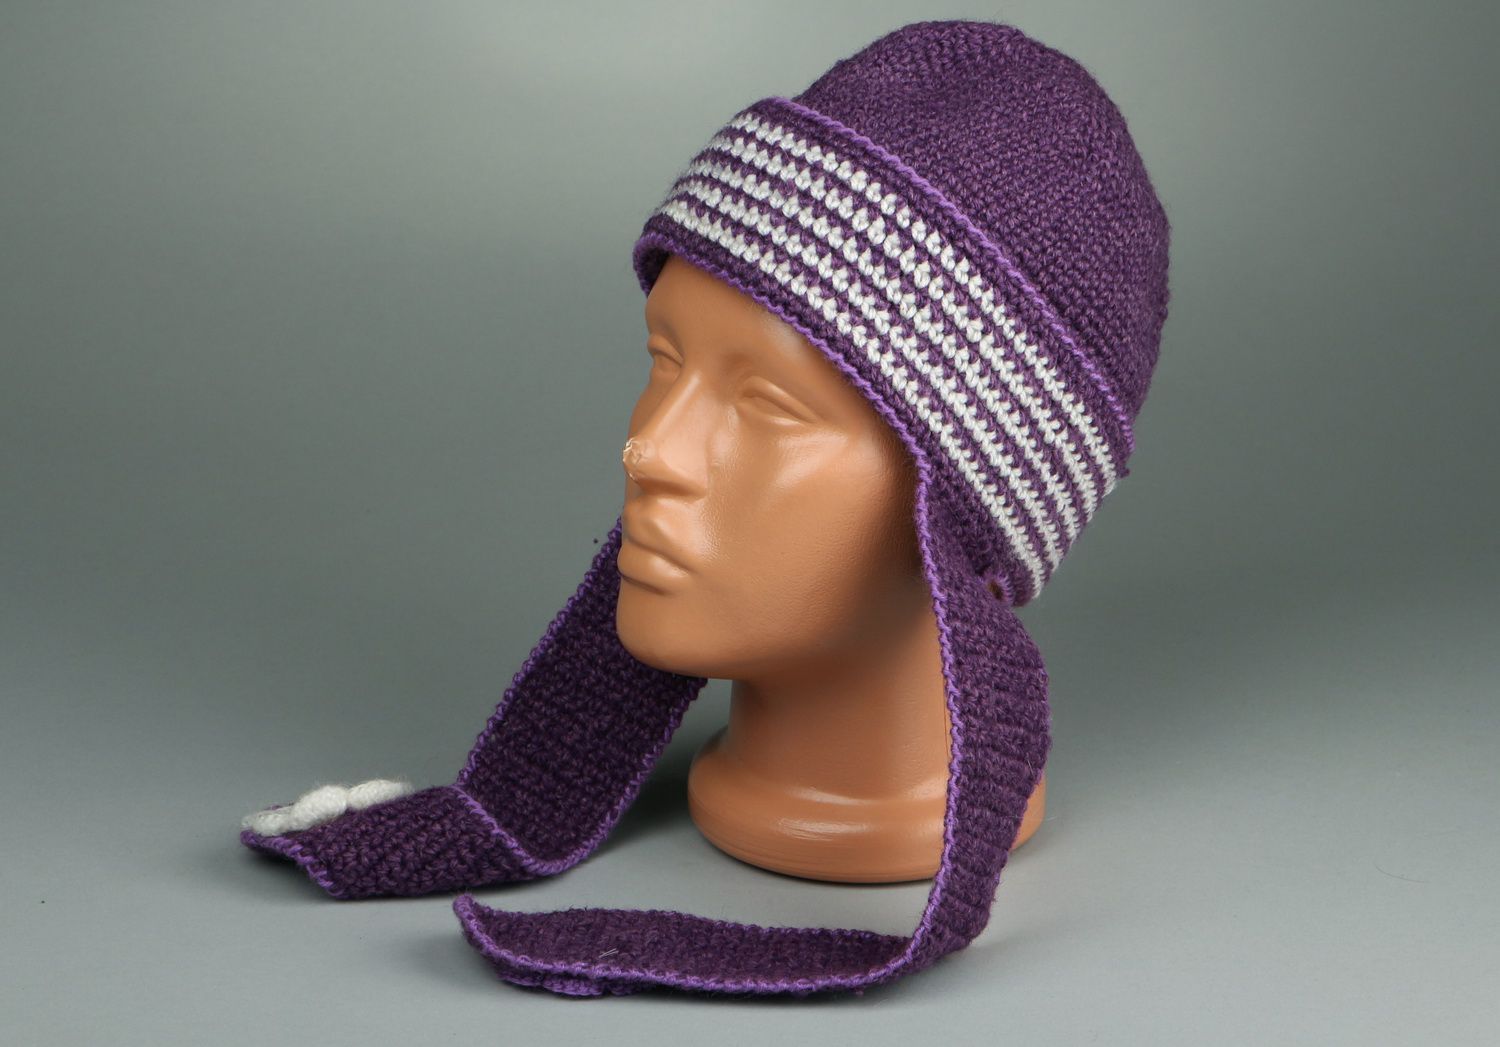 Crochet hat with ear flaps photo 1